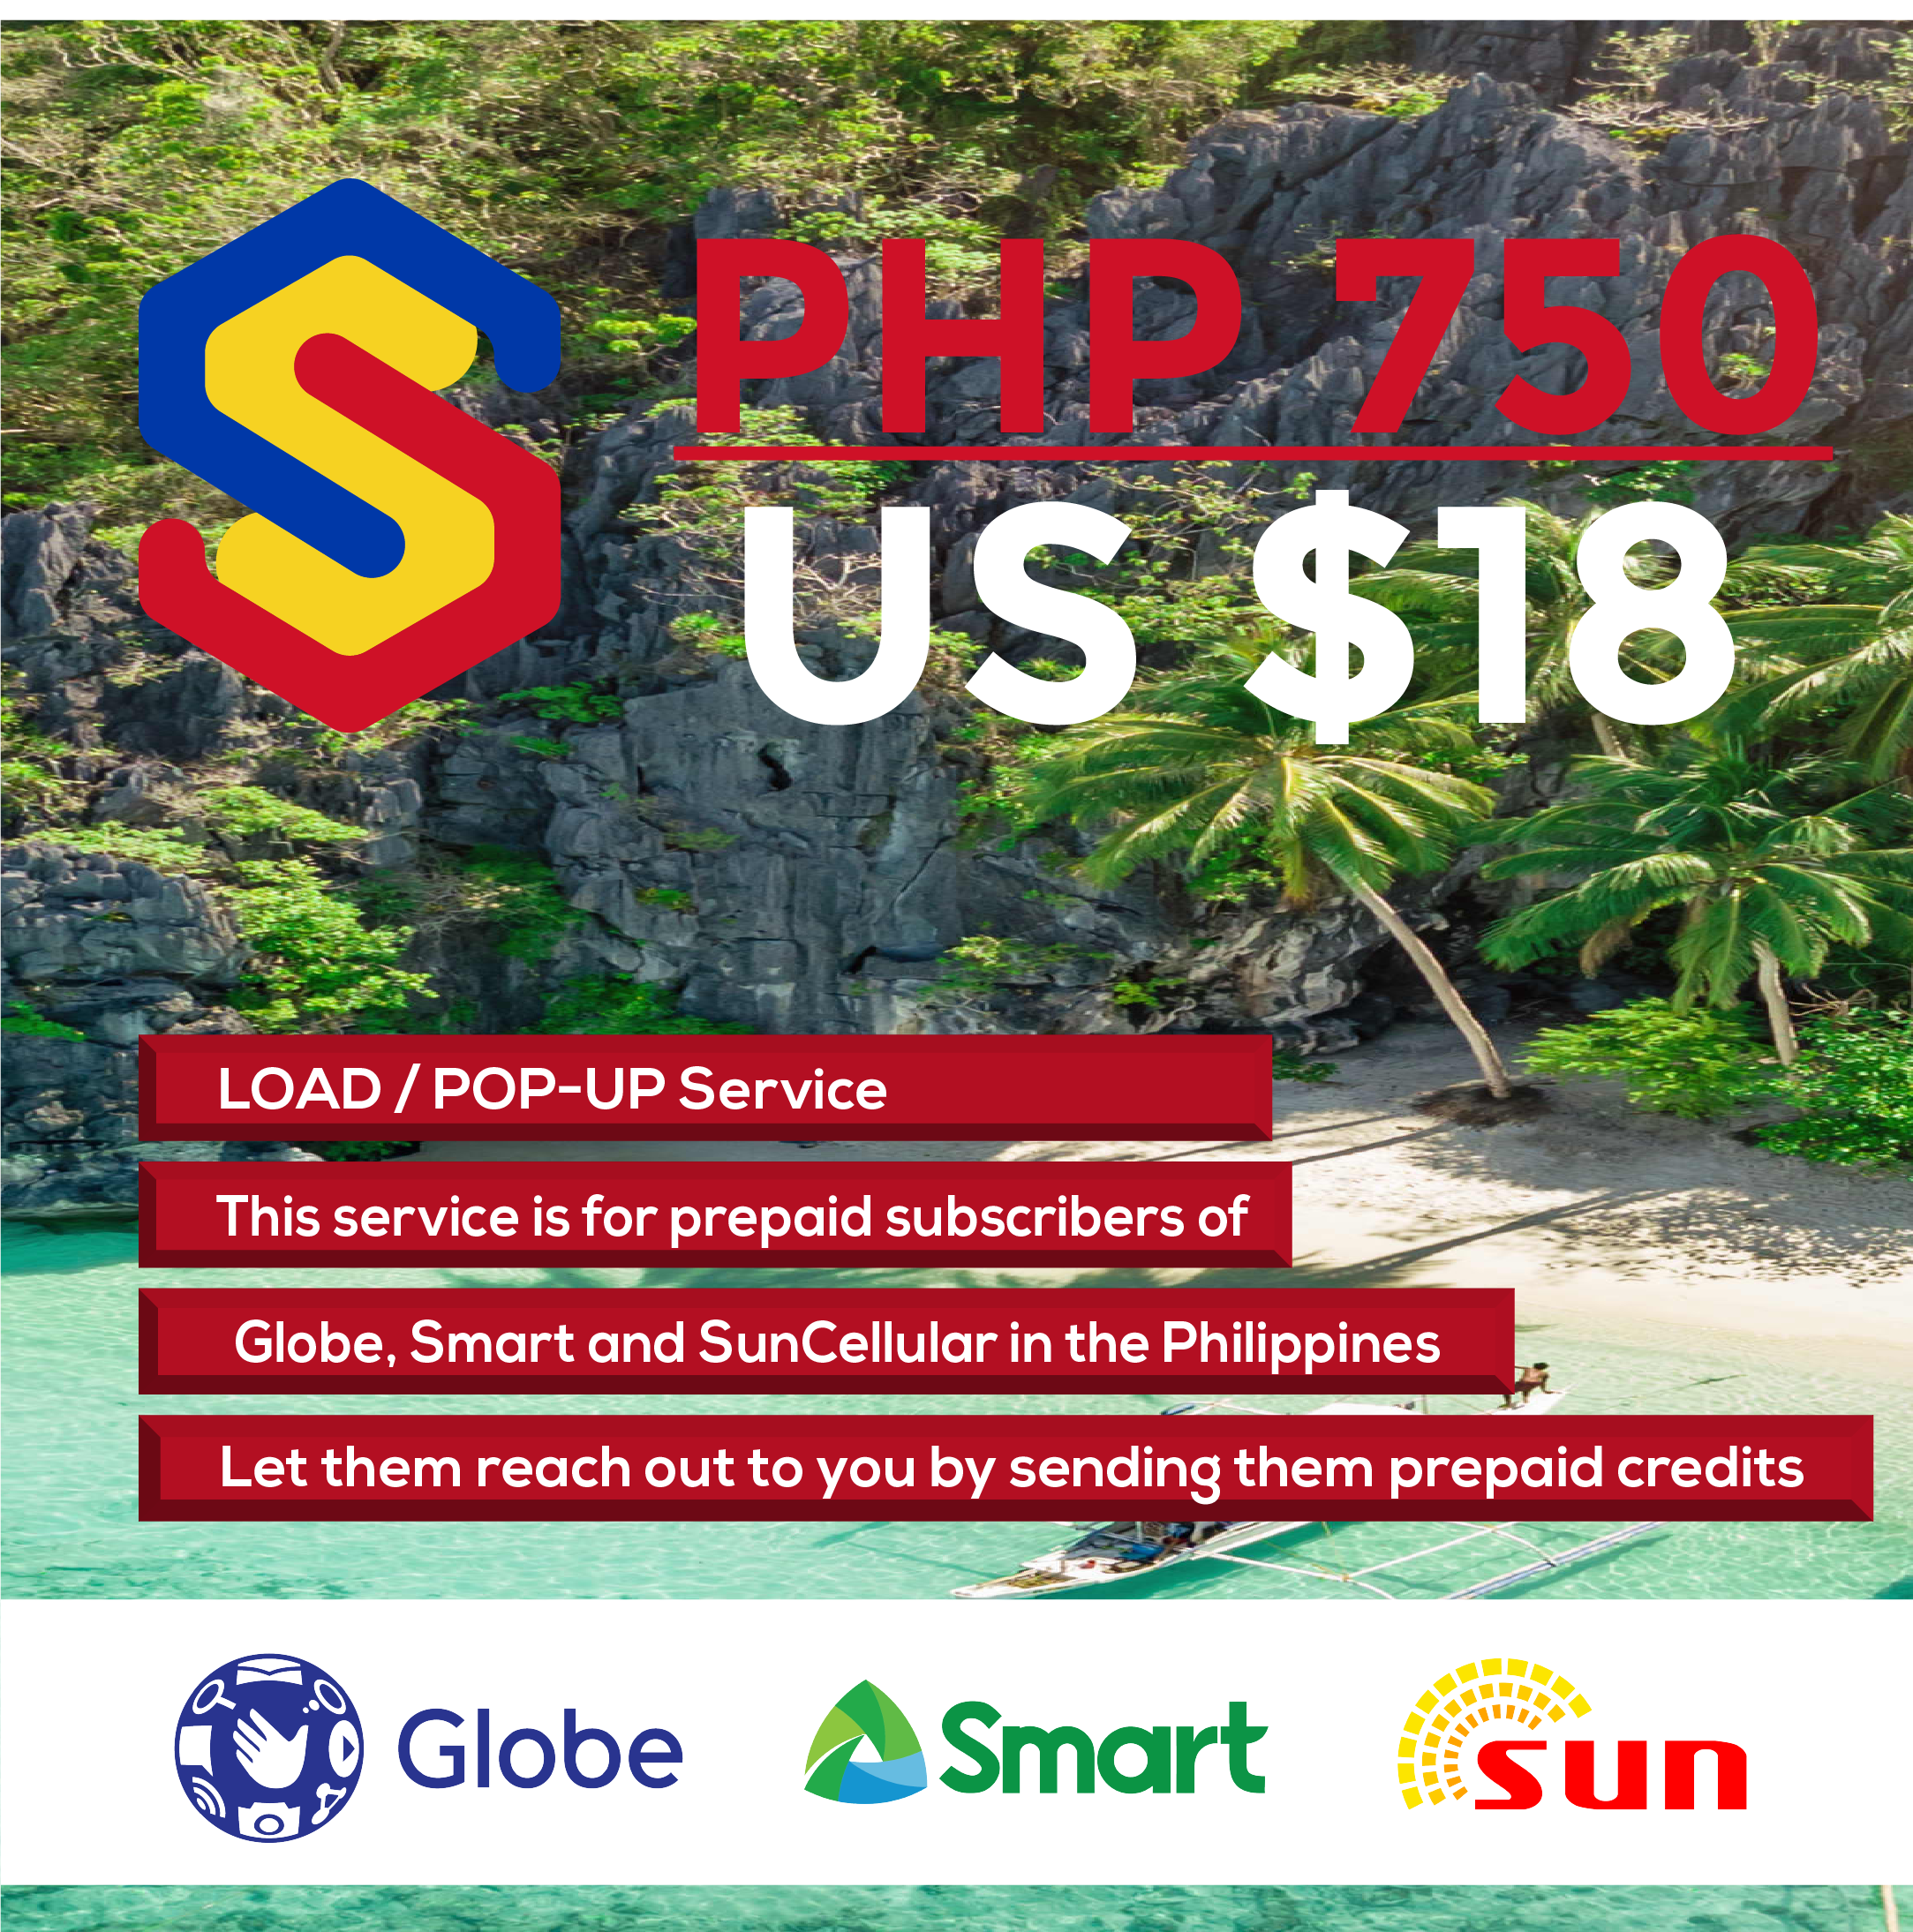 PHP 750 Load/Top-up